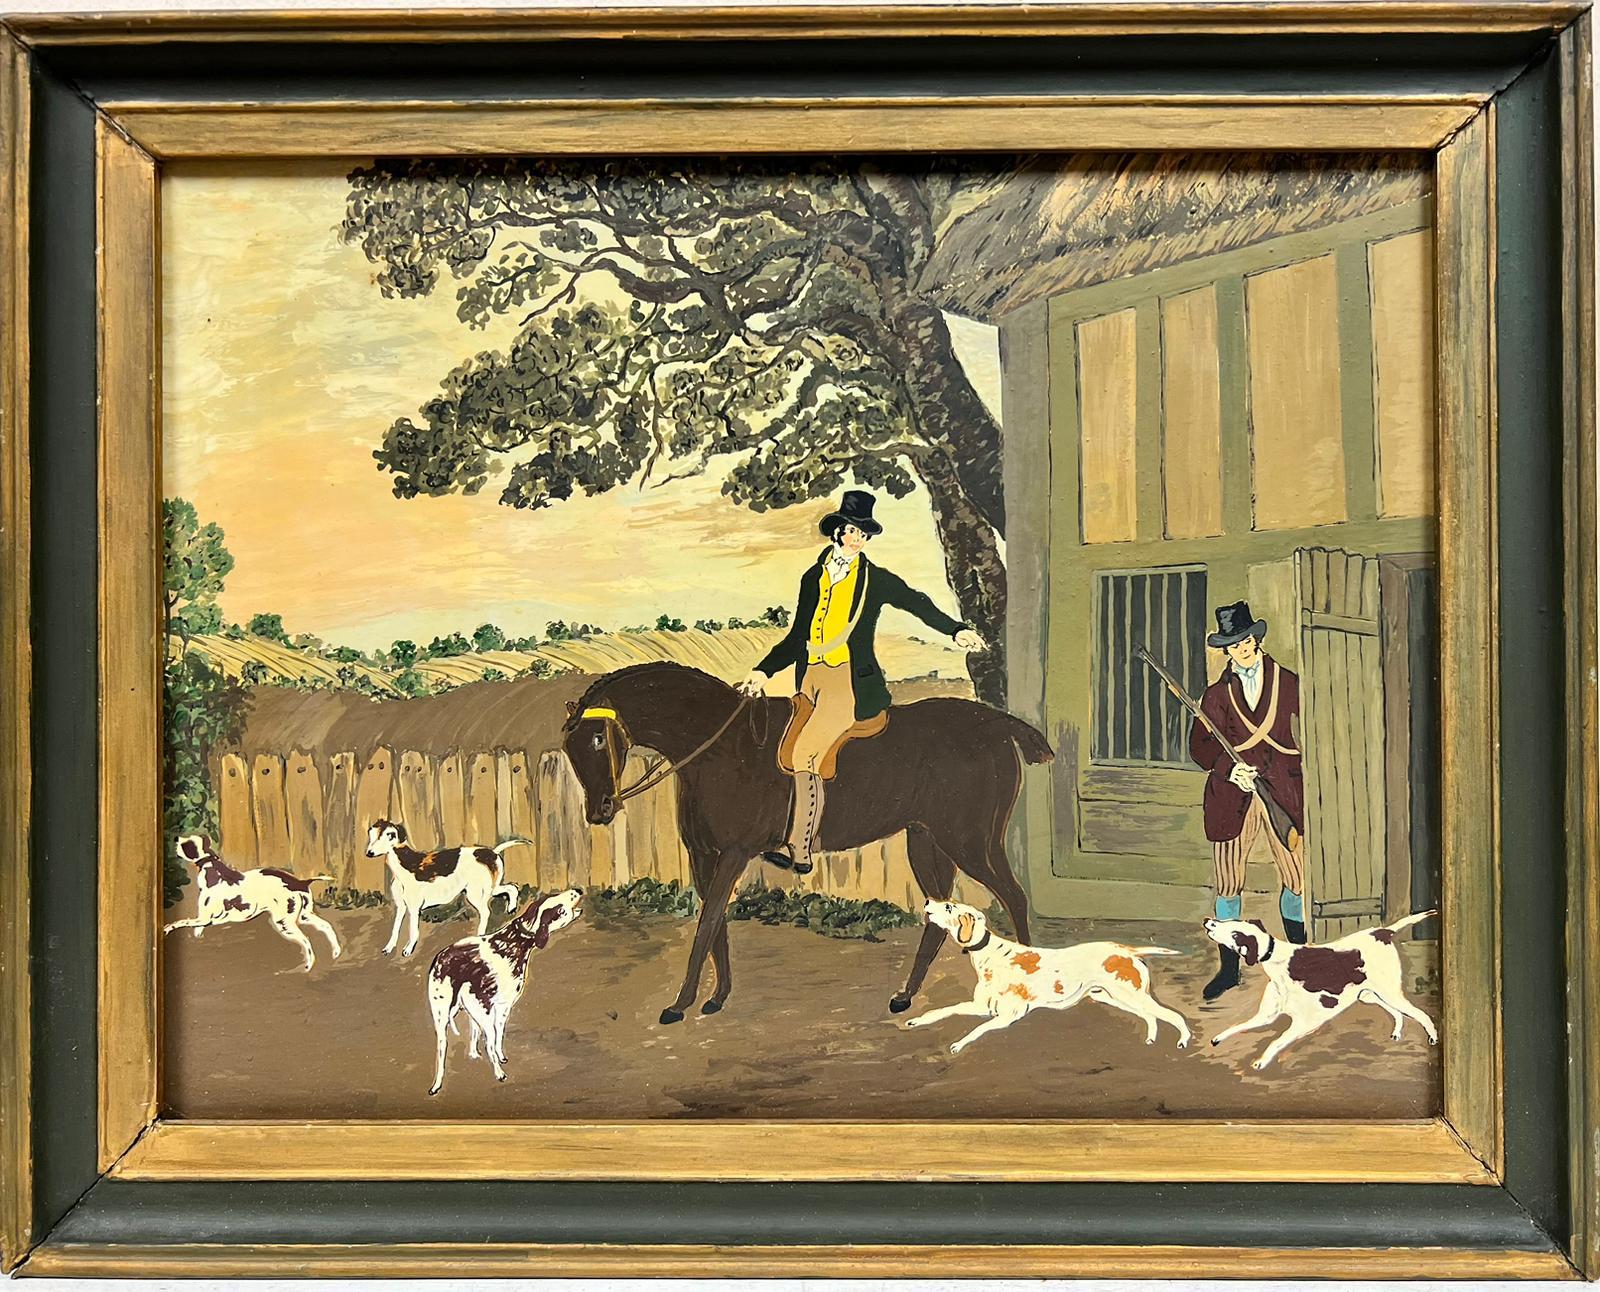 English Naive/ Folk Art School, 20th century
oil on board, framed
framed: 12 x 16 inches
board: 11.5 x 14 inches
provenance: private collection, England
condition: overall very good 